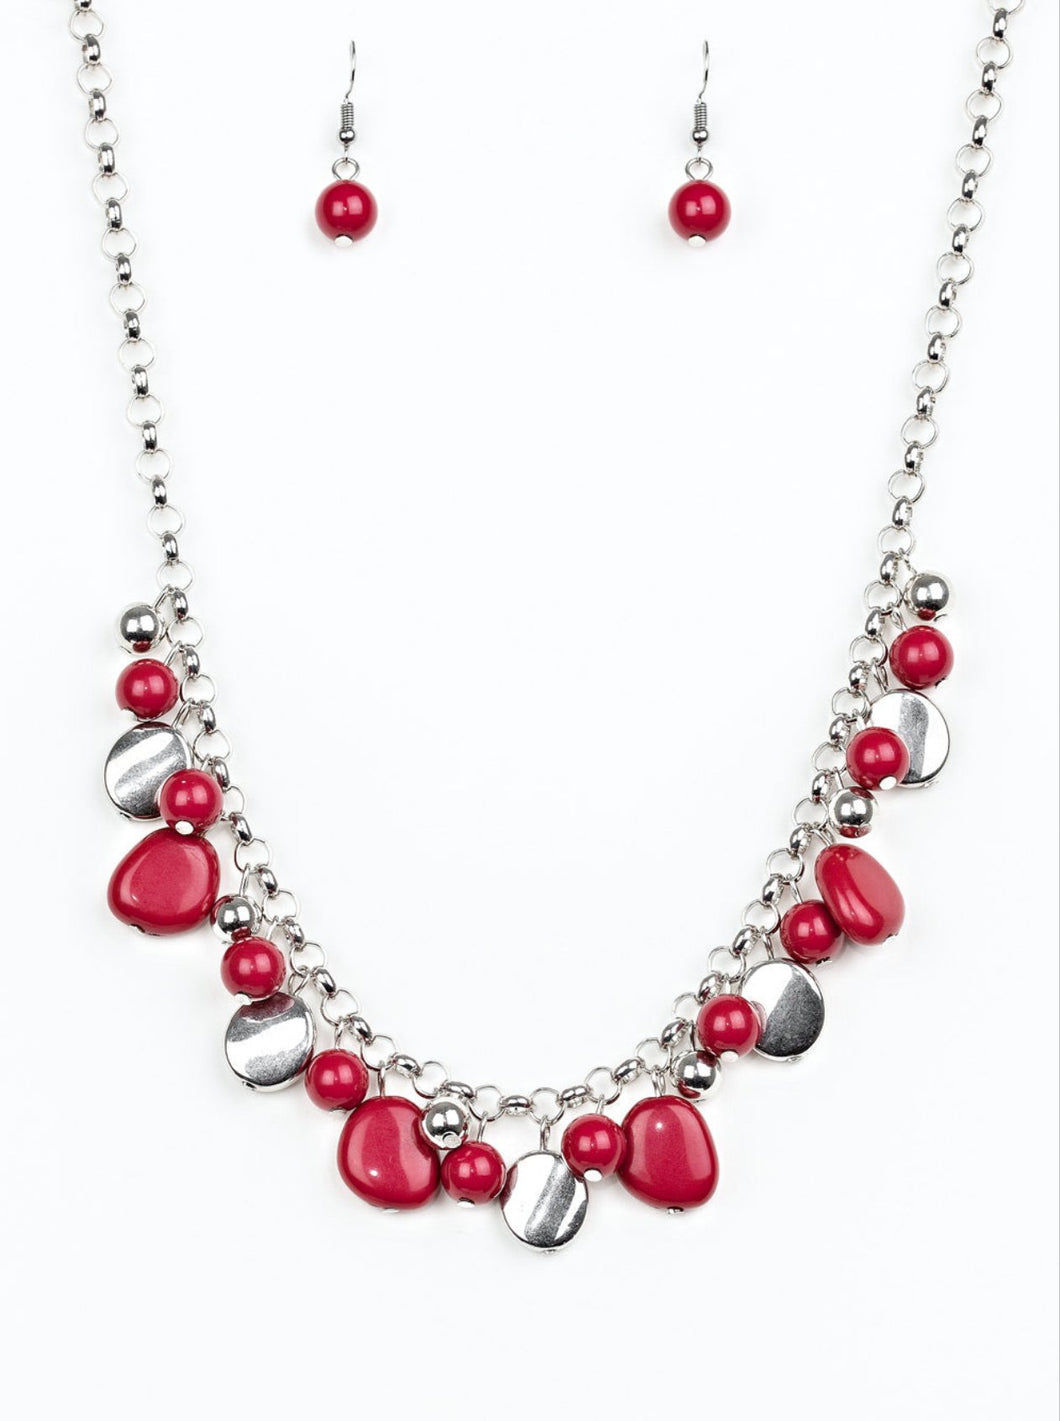 Flirtatiously Florida Red and Silver Necklace and Earrings